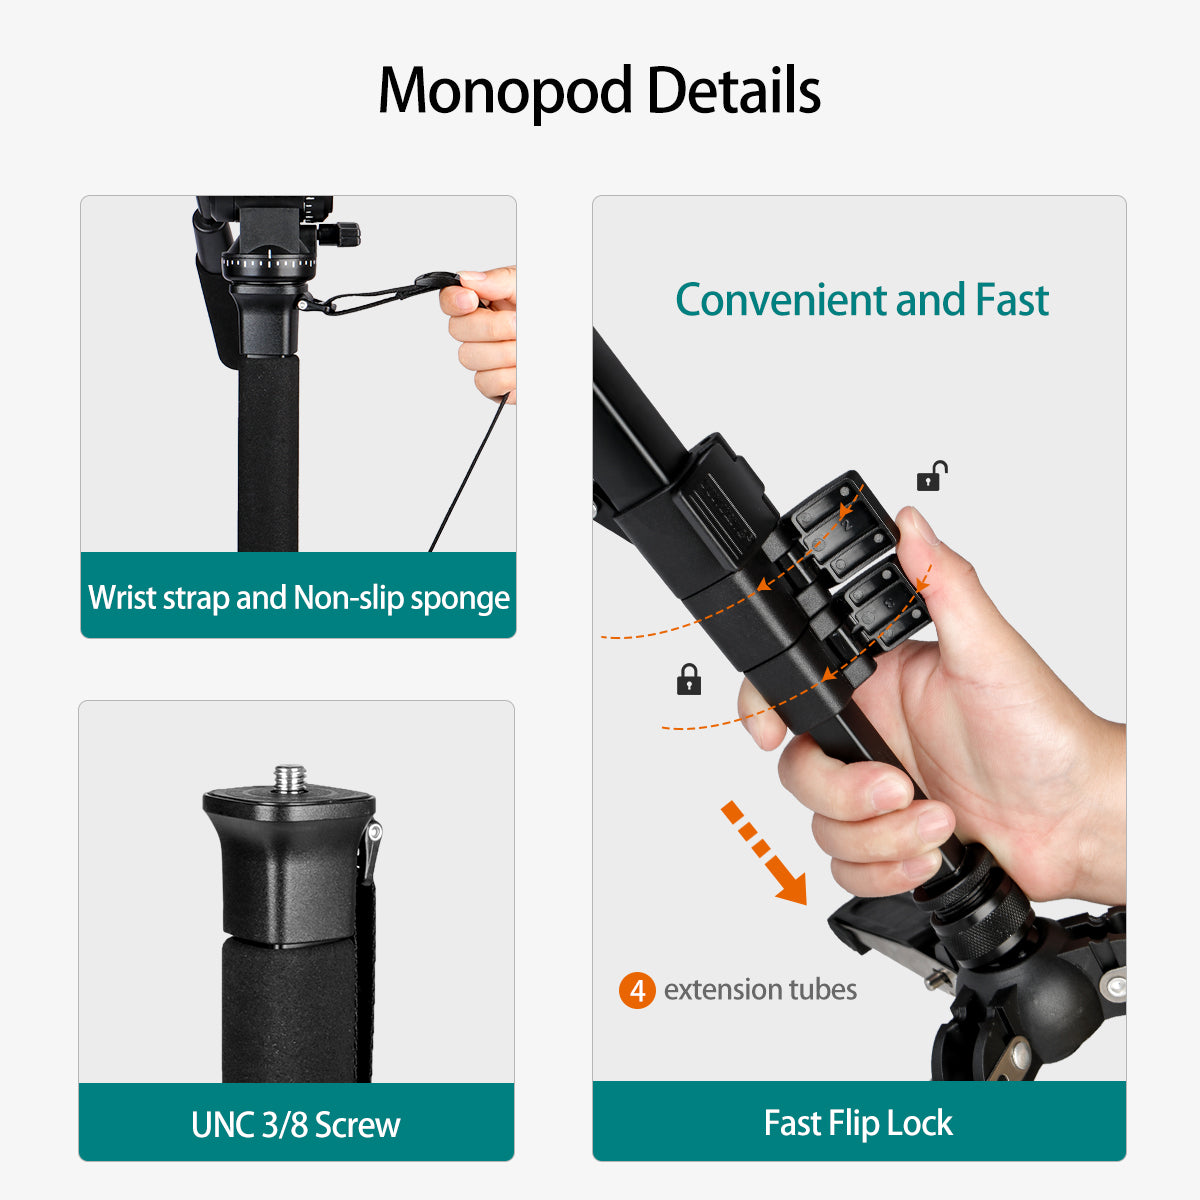 Camera Aluminum Monopod with Fluid Head and Foldable Tripod Base for DSLR Camera.Max Height 148cm / 58 inch. Payload up to 3kg/6.6lbs.(YT-288)